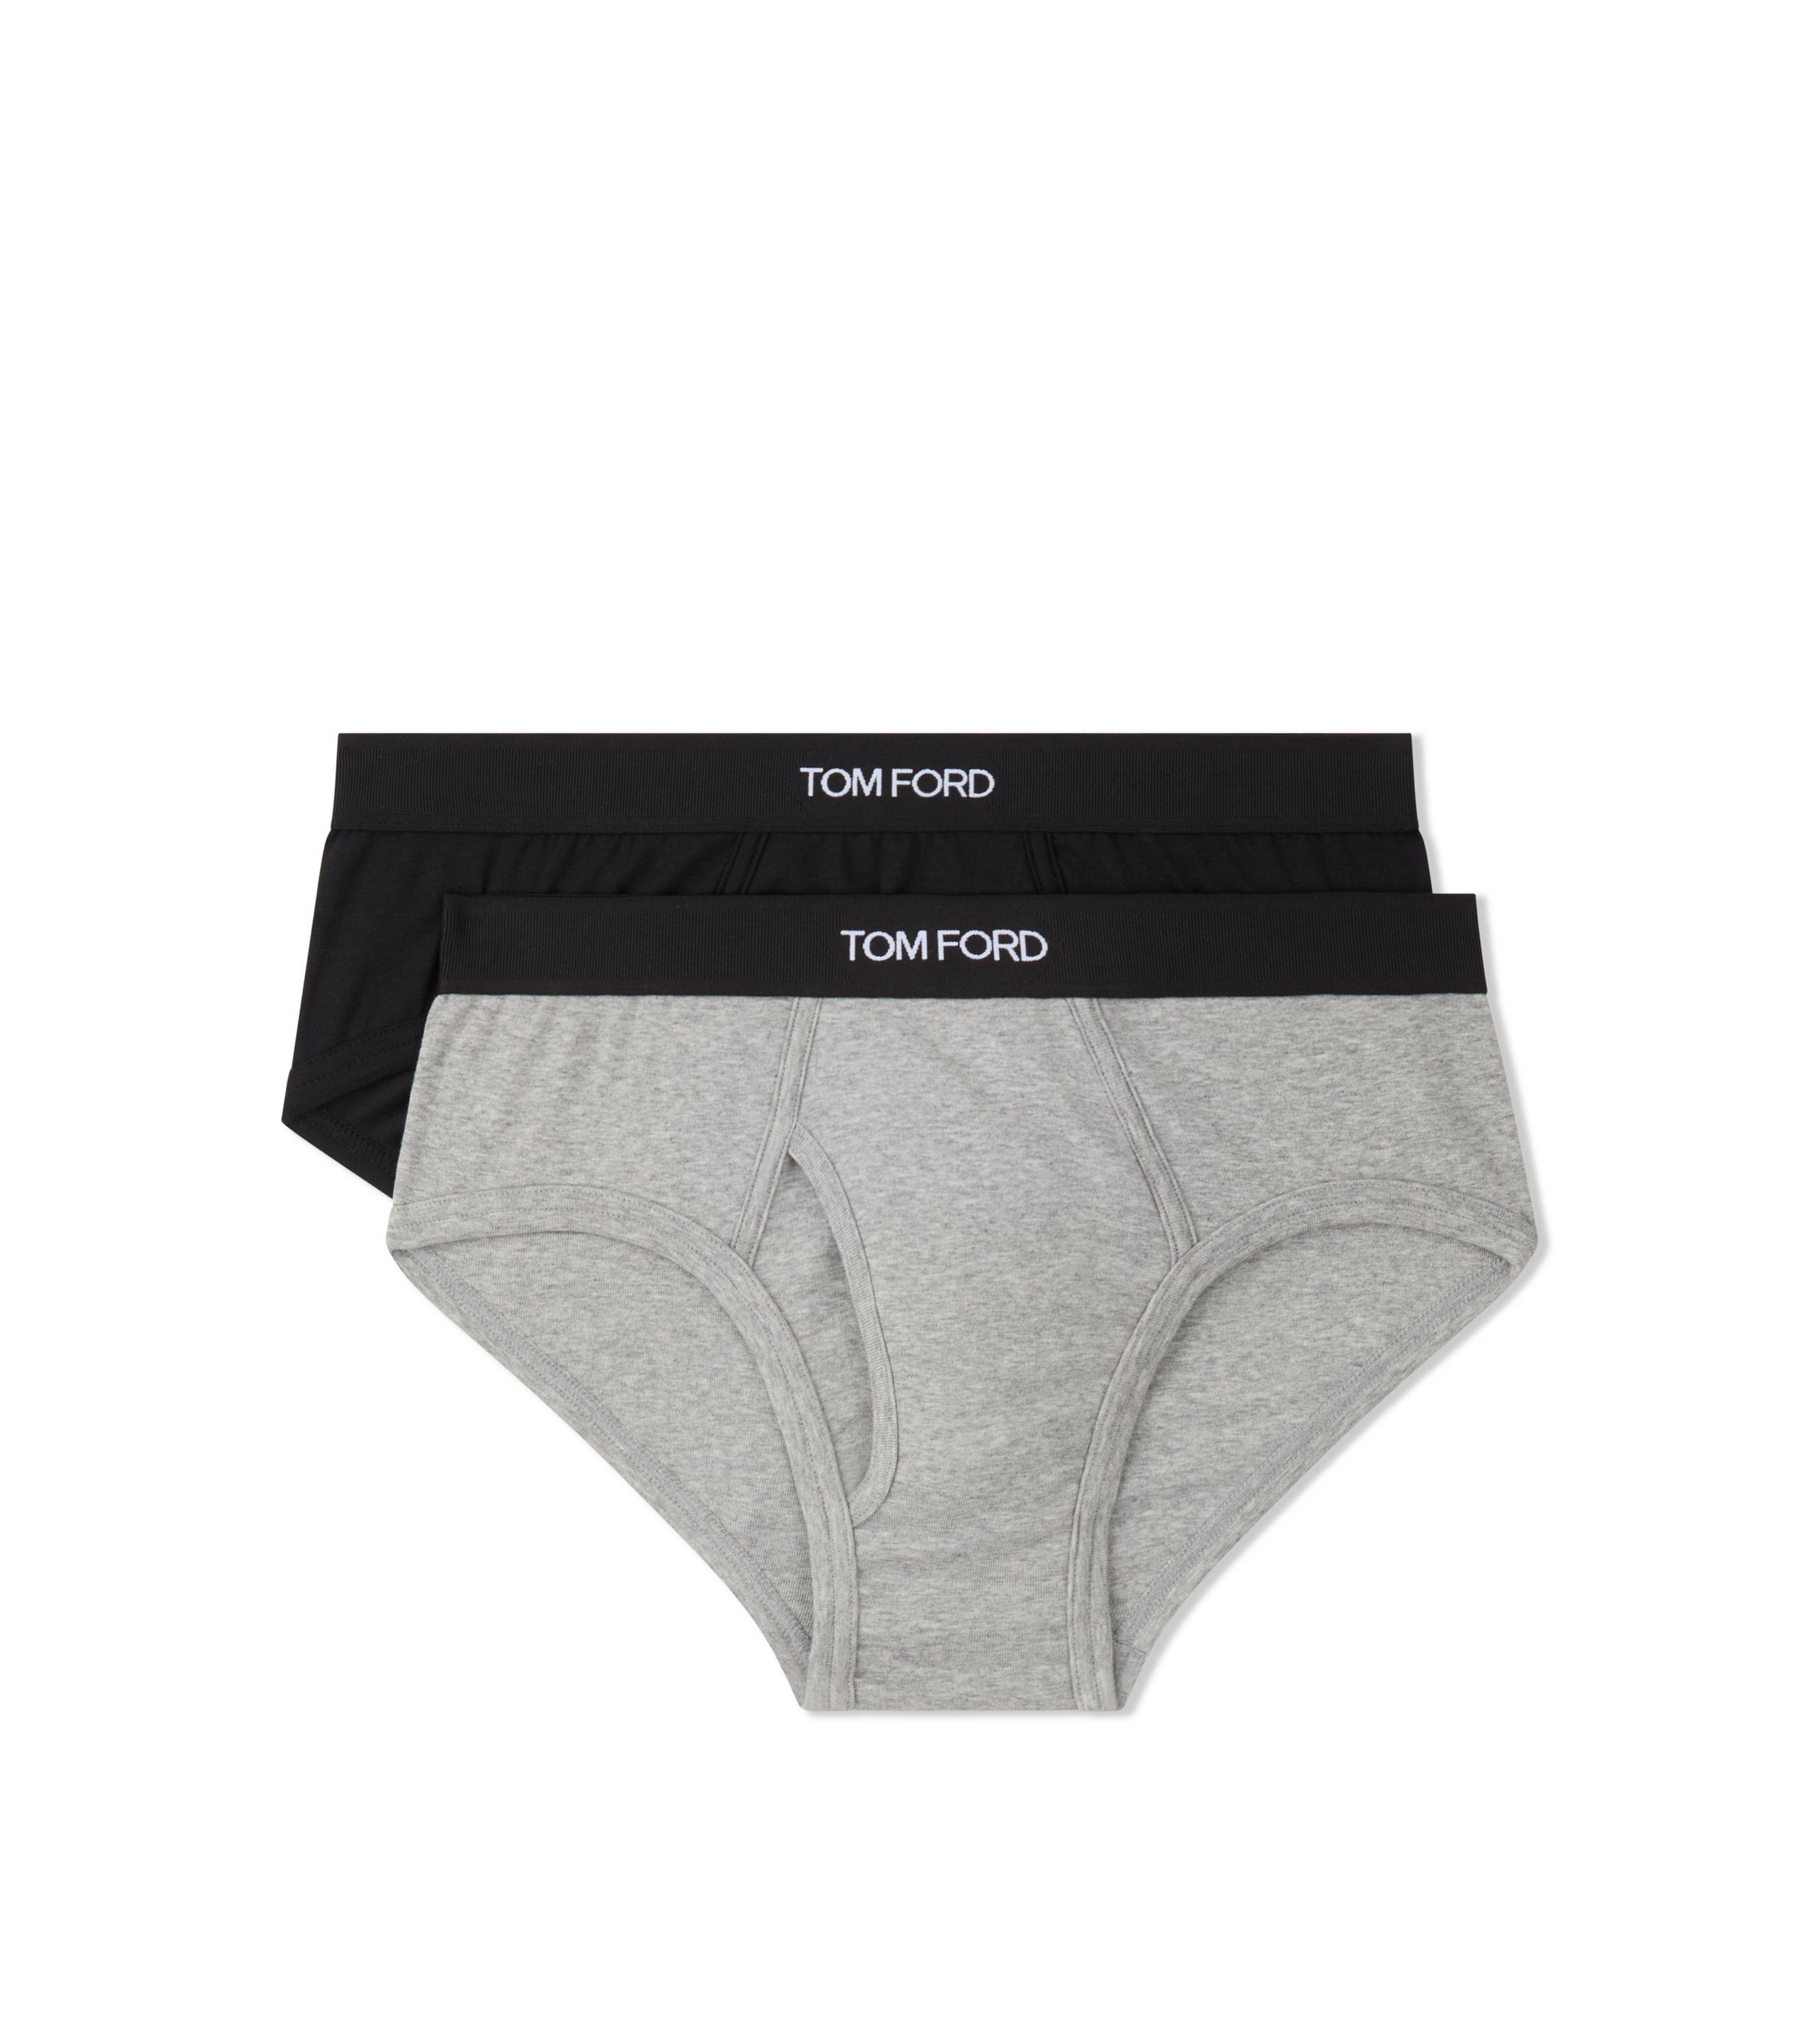 COTTON BRIEFS TWO PACK - 1